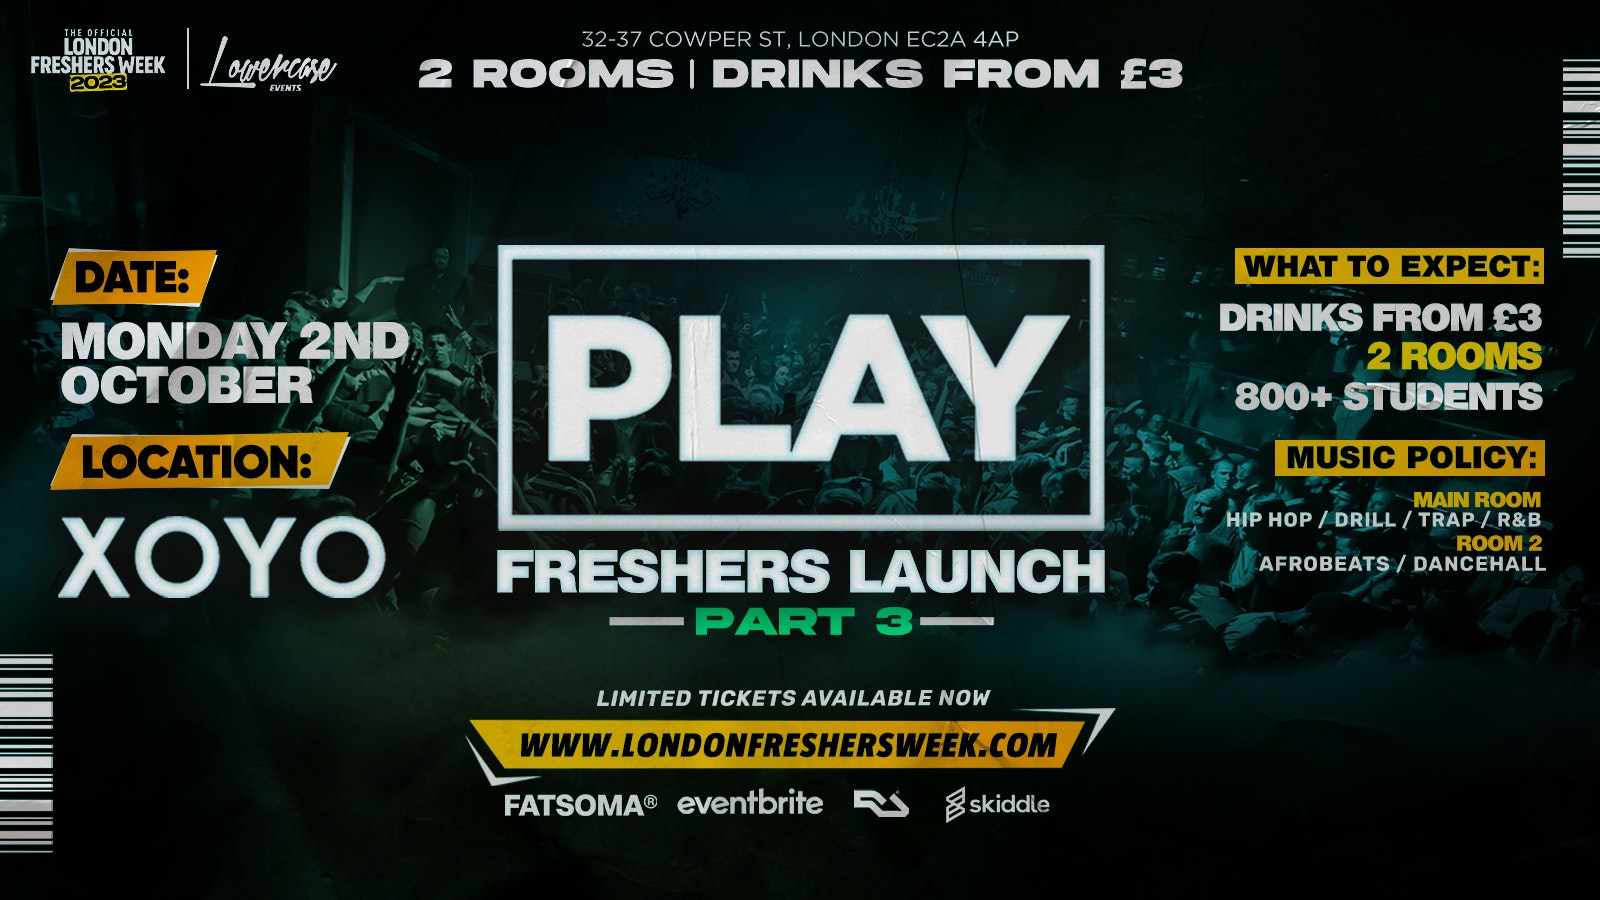 ⚠️ FRESHERS LAUNCH PART 3 ⚠️ Play London At XOYO – The Biggest Weekly Monday Student Night